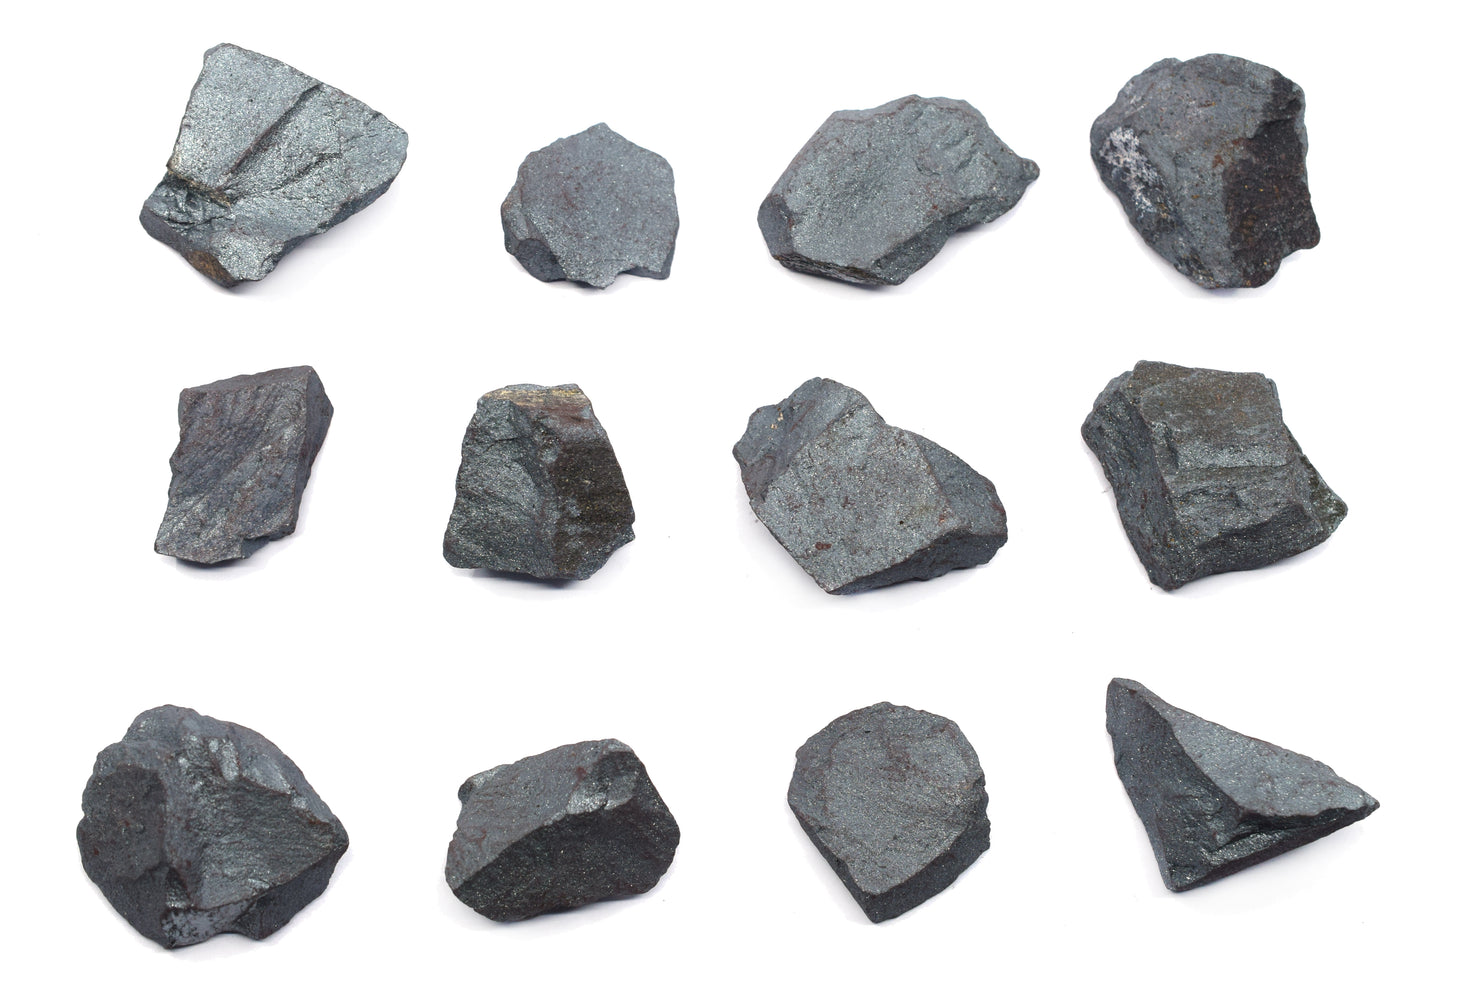 12PK Raw Hematite, Mineral Specimens - Approx. 1" - Geologist Selected & Hand Processed - Great for Science Classrooms - Class Pack - Eisco Labs